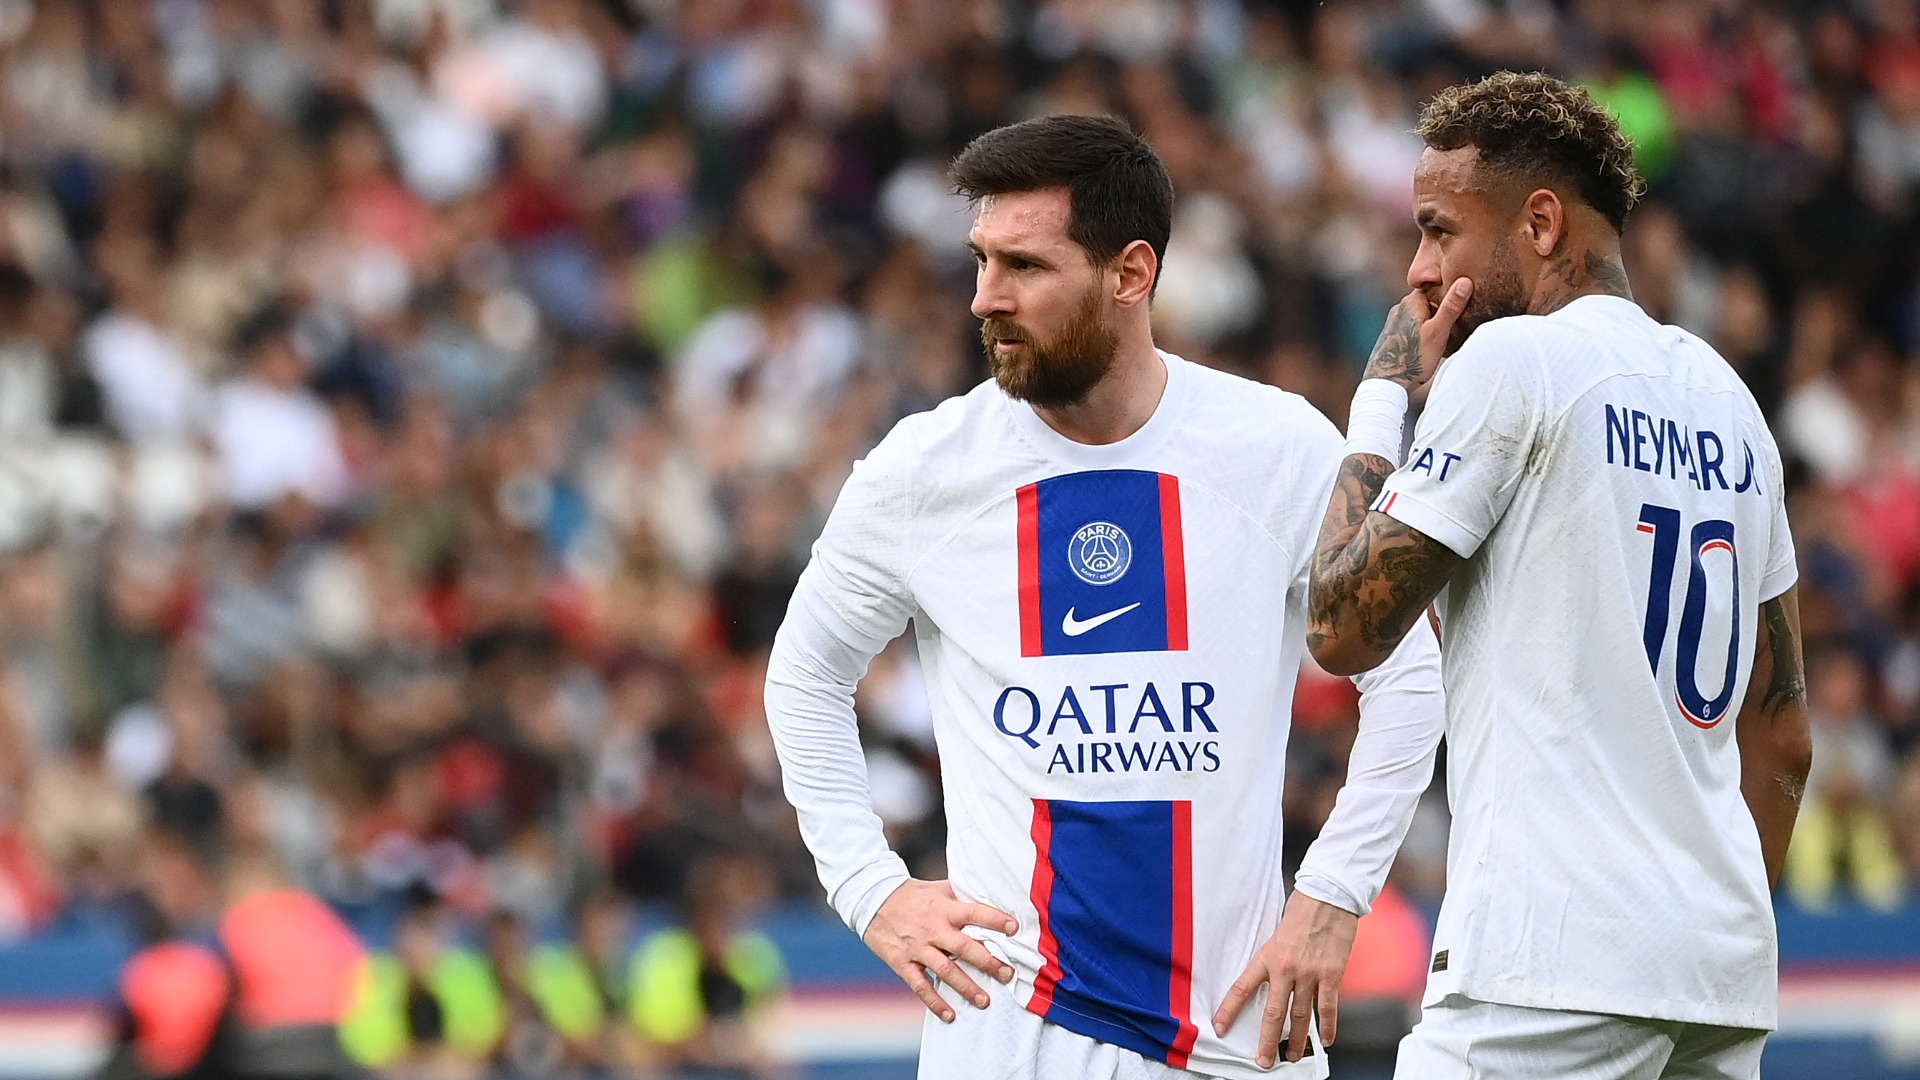 How Messi, Neymar Can Be Successfully Defended, per Guillermo Maripan